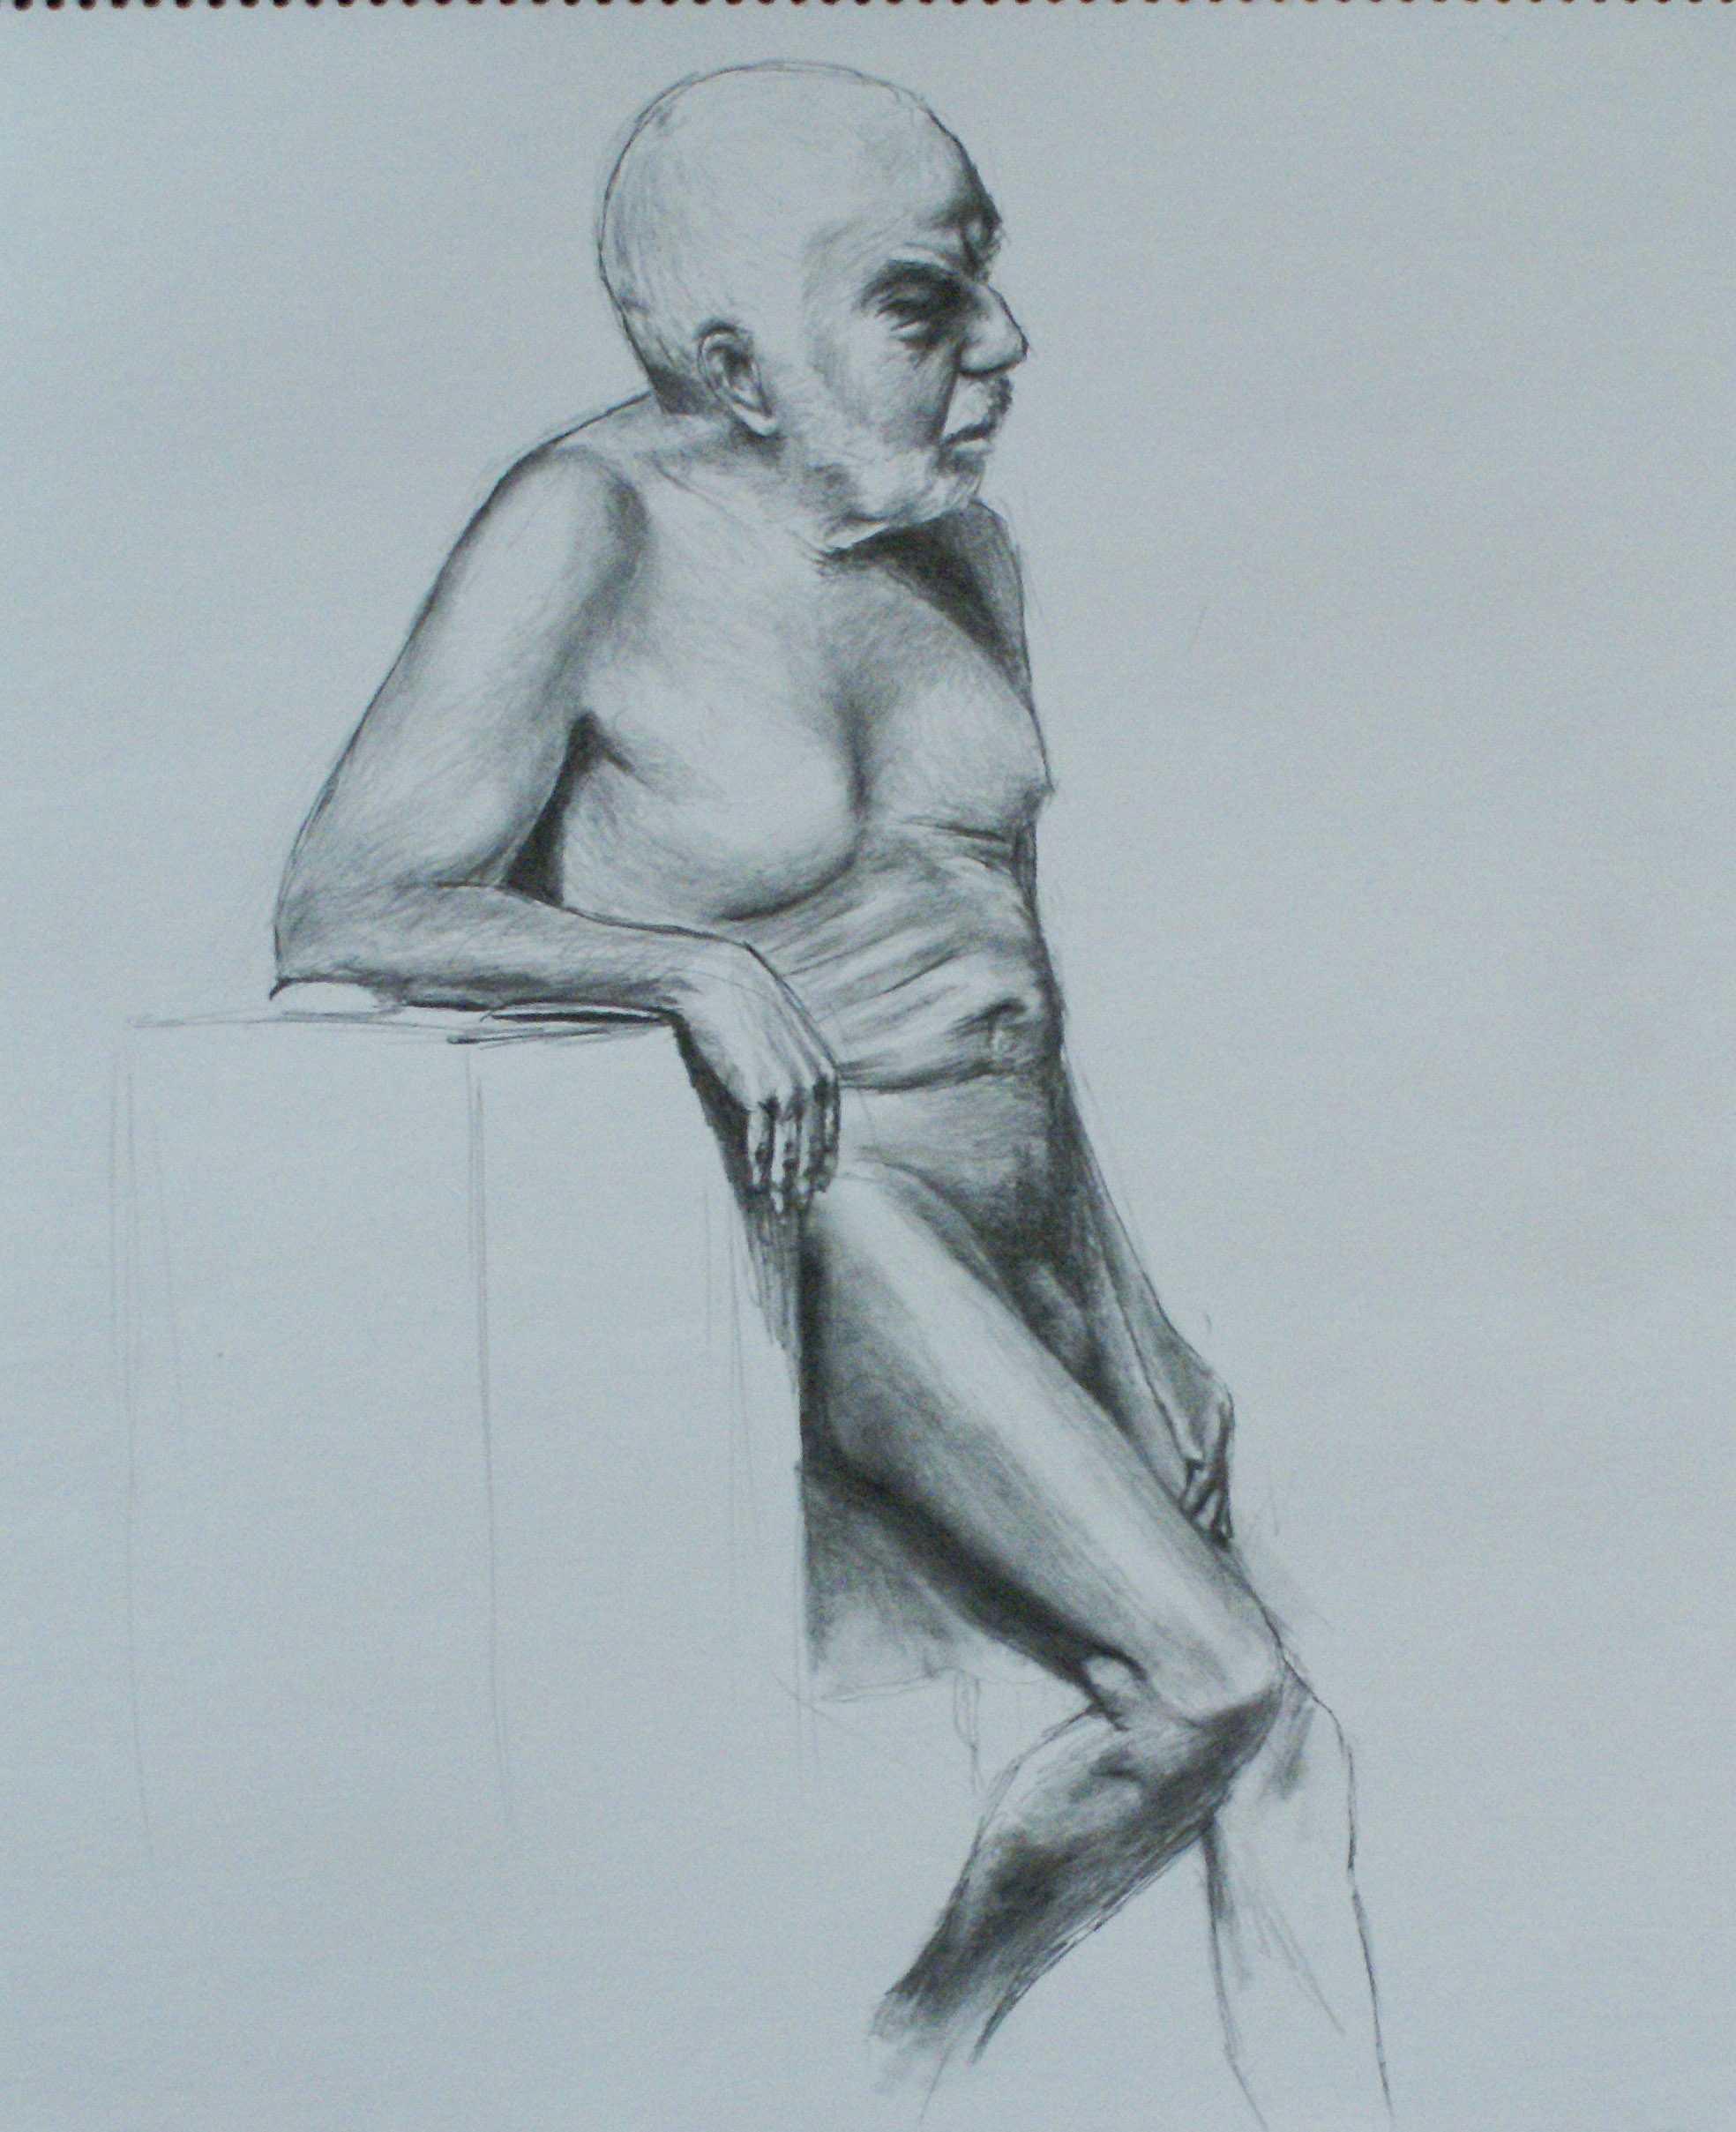 David Merrique- Anatomy and Figure Drawing. Charcoal on paper 18 x 24 in.